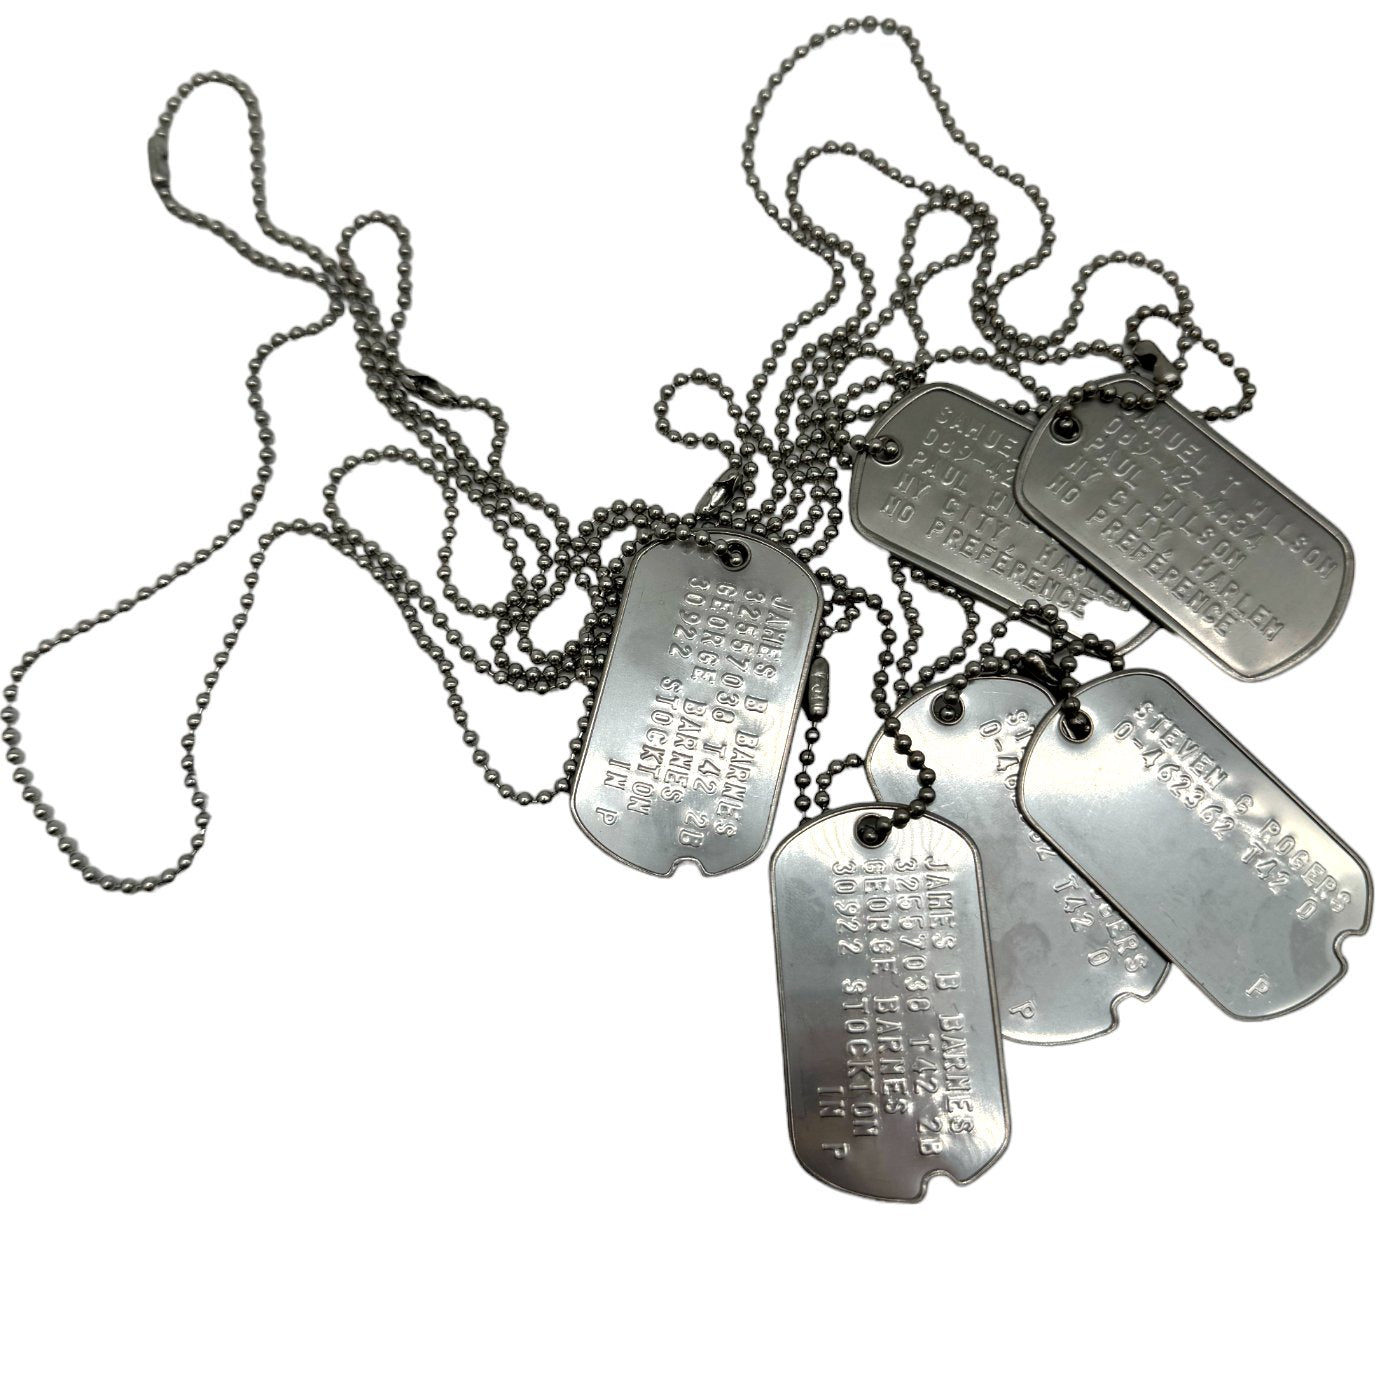 Bucky, Falcon, Captain America (Complete Collection) WWII Style Military Dog Tags Prop Replica - Stainless Steel - Chain&Silencers Included - TheDogTagCo